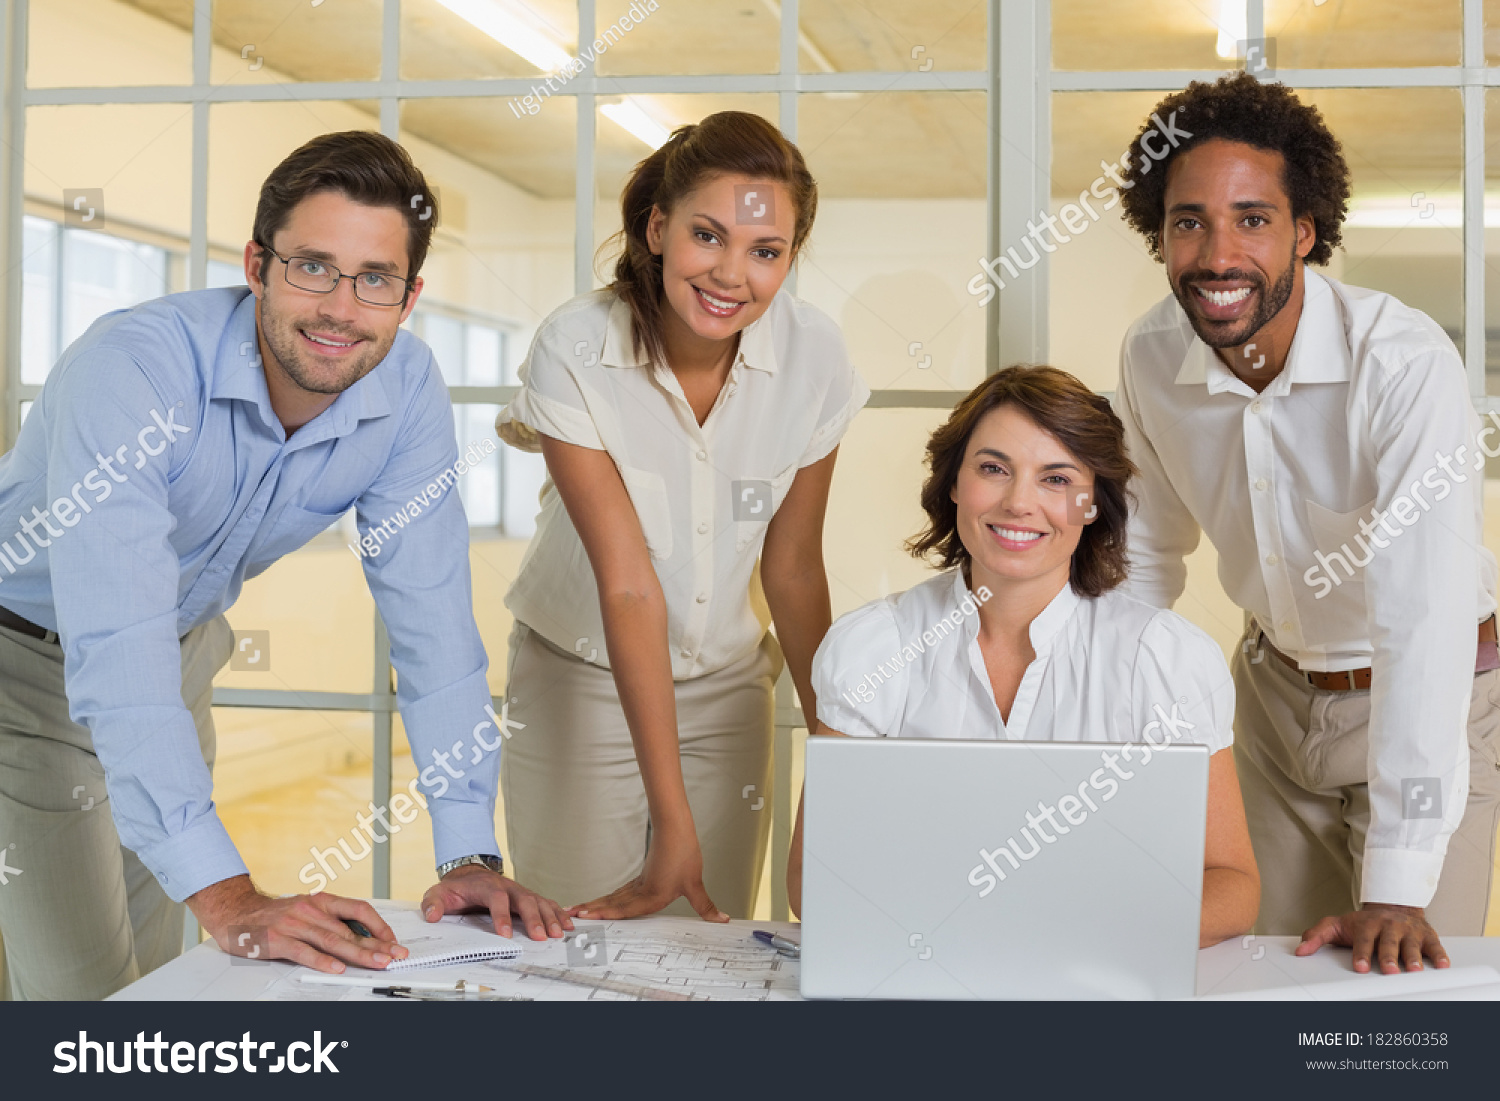 Portrait of happy business people using laptop in meeting at the office #182860358